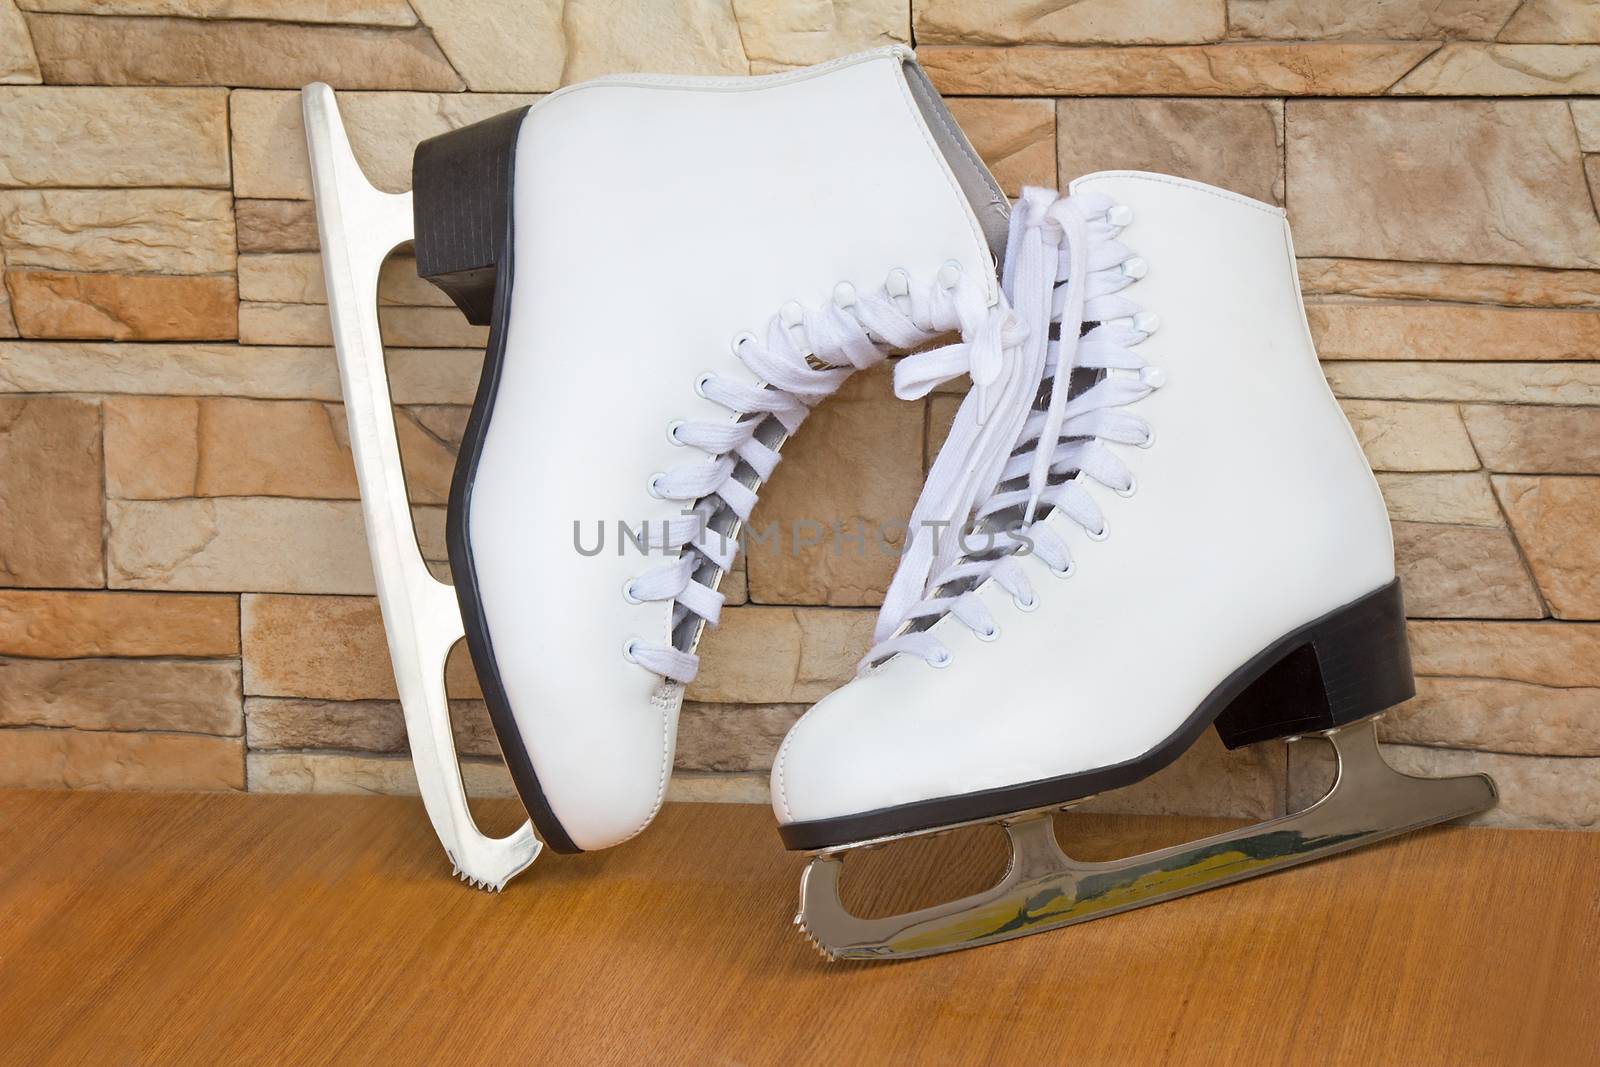 
The skates and graceful boots of white color for figure skating on ice for women.